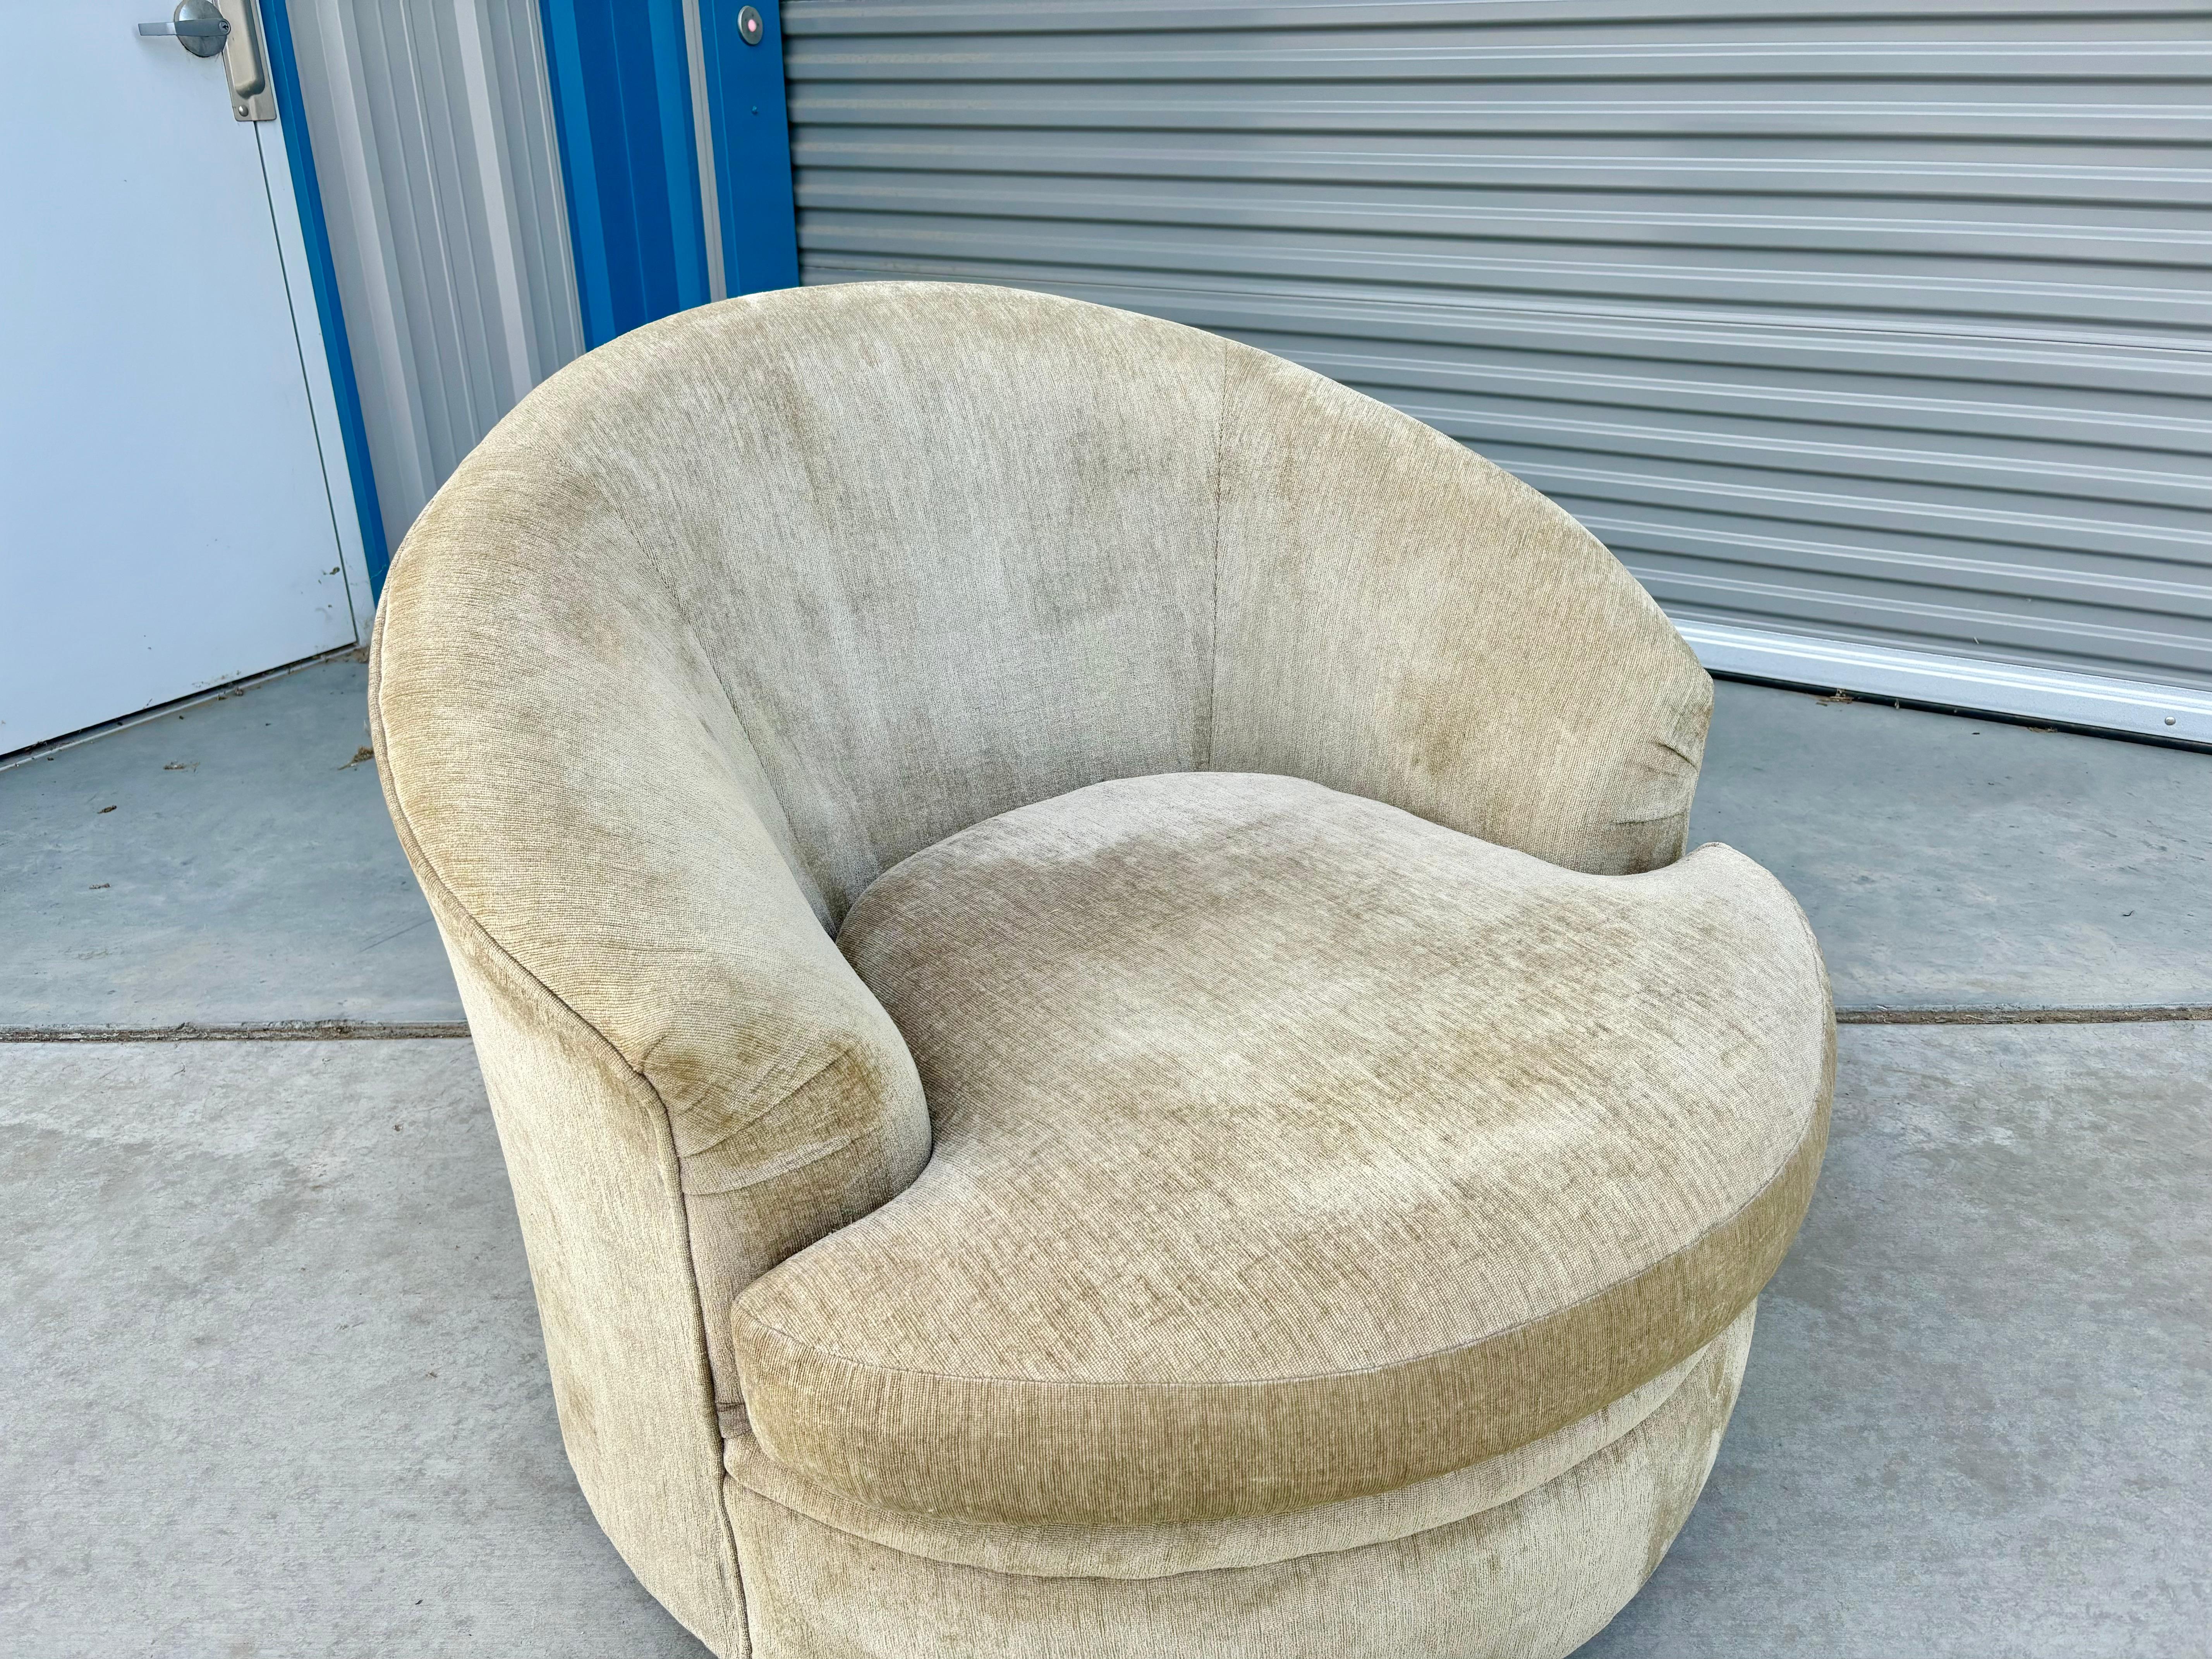 1970s Mid Century Modern Lounge Chairs - Set of 2 For Sale 1